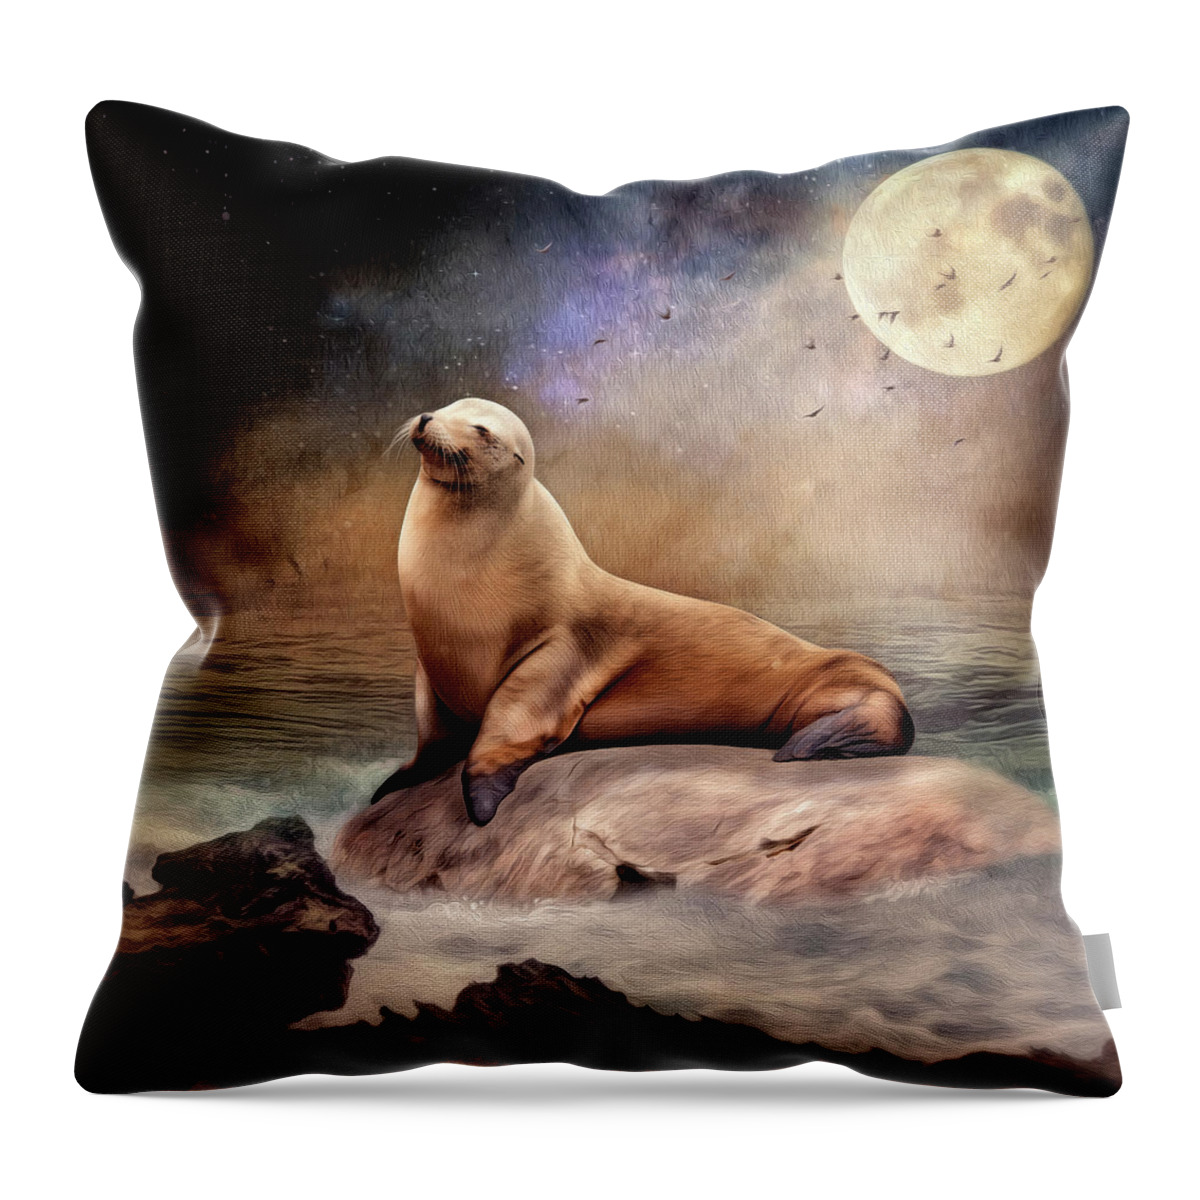 Seal Throw Pillow featuring the digital art Moonlight by Maggy Pease